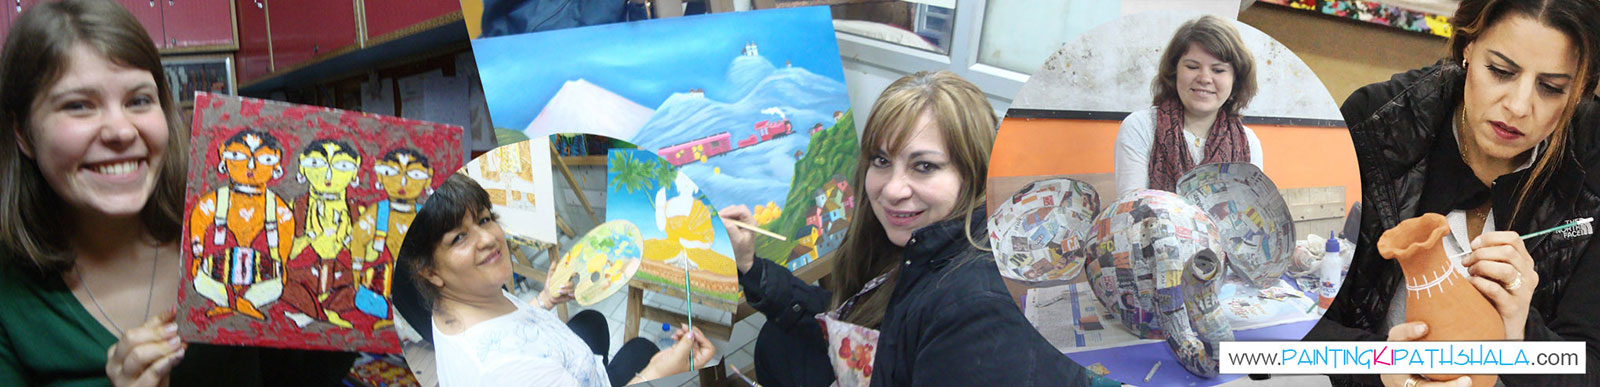 Drawing, Painting, Art & Craft, Hobby Classes for Kids and Adults